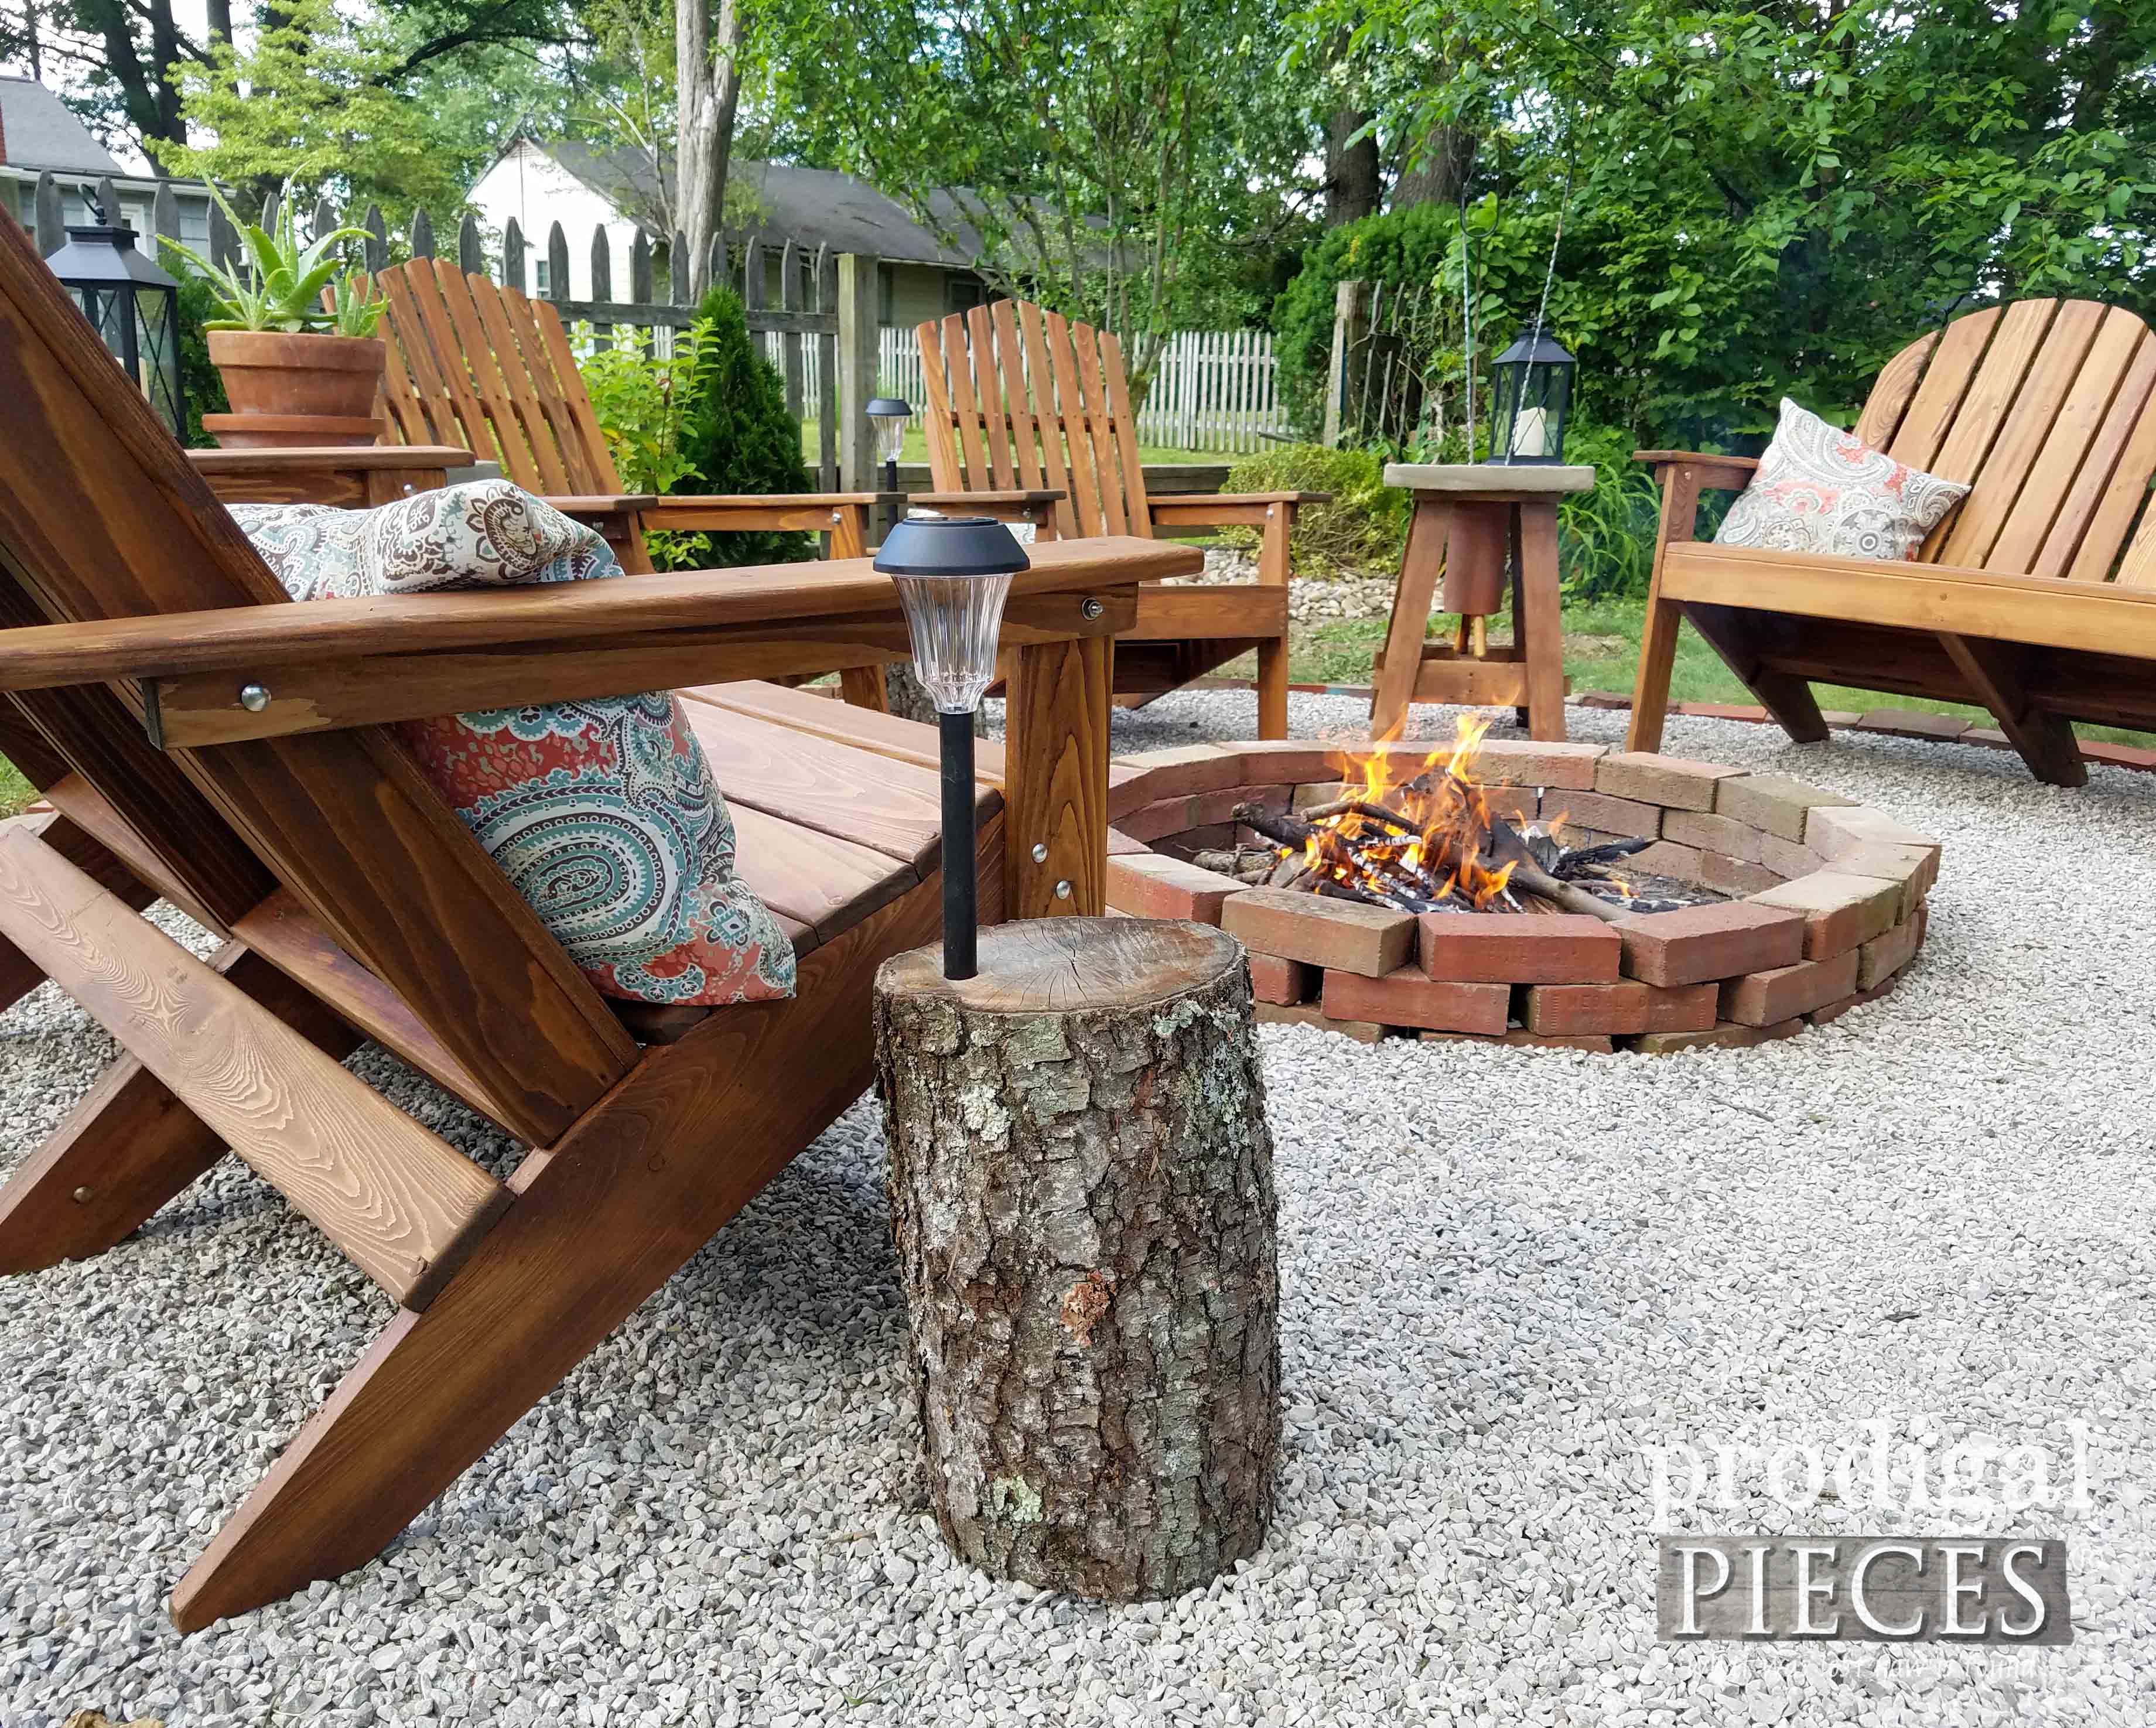 DIY Repurposed Log Table with Solar Light by Prodigal Pieces | prodigalpieces.com